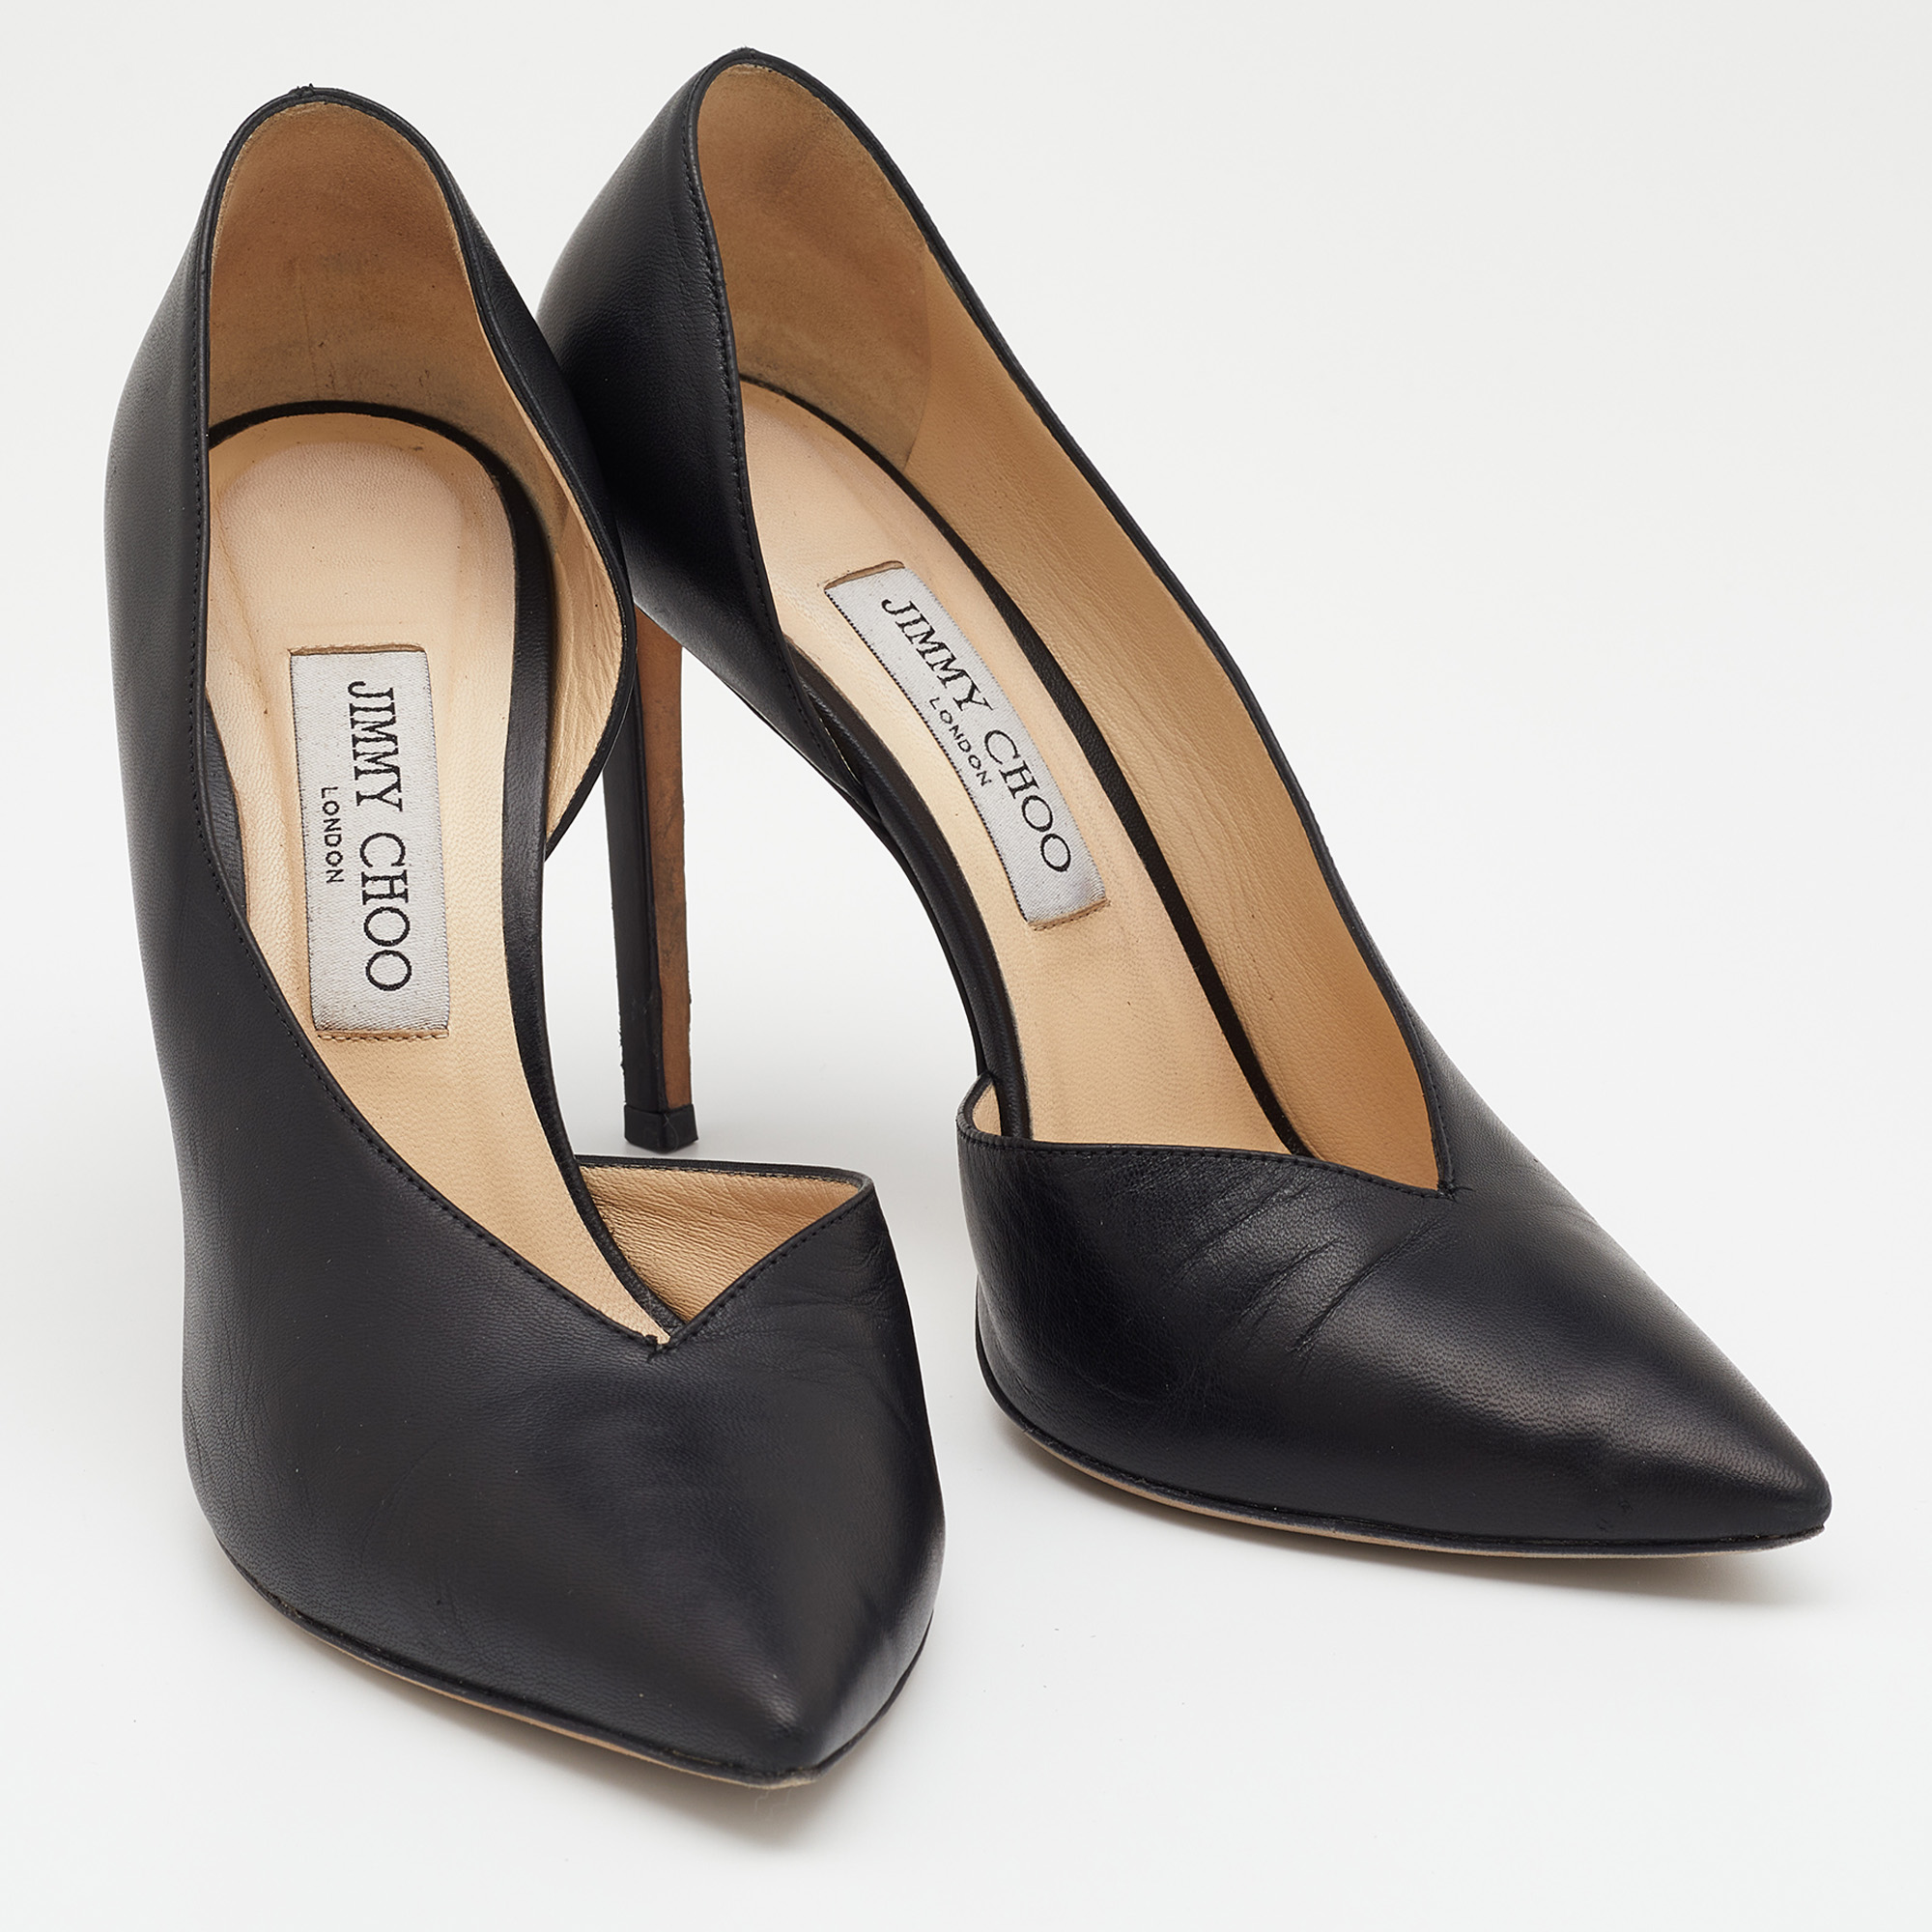 Jimmy Choo Black Leather Pointed Toe D'orsay Pumps Size 39.5